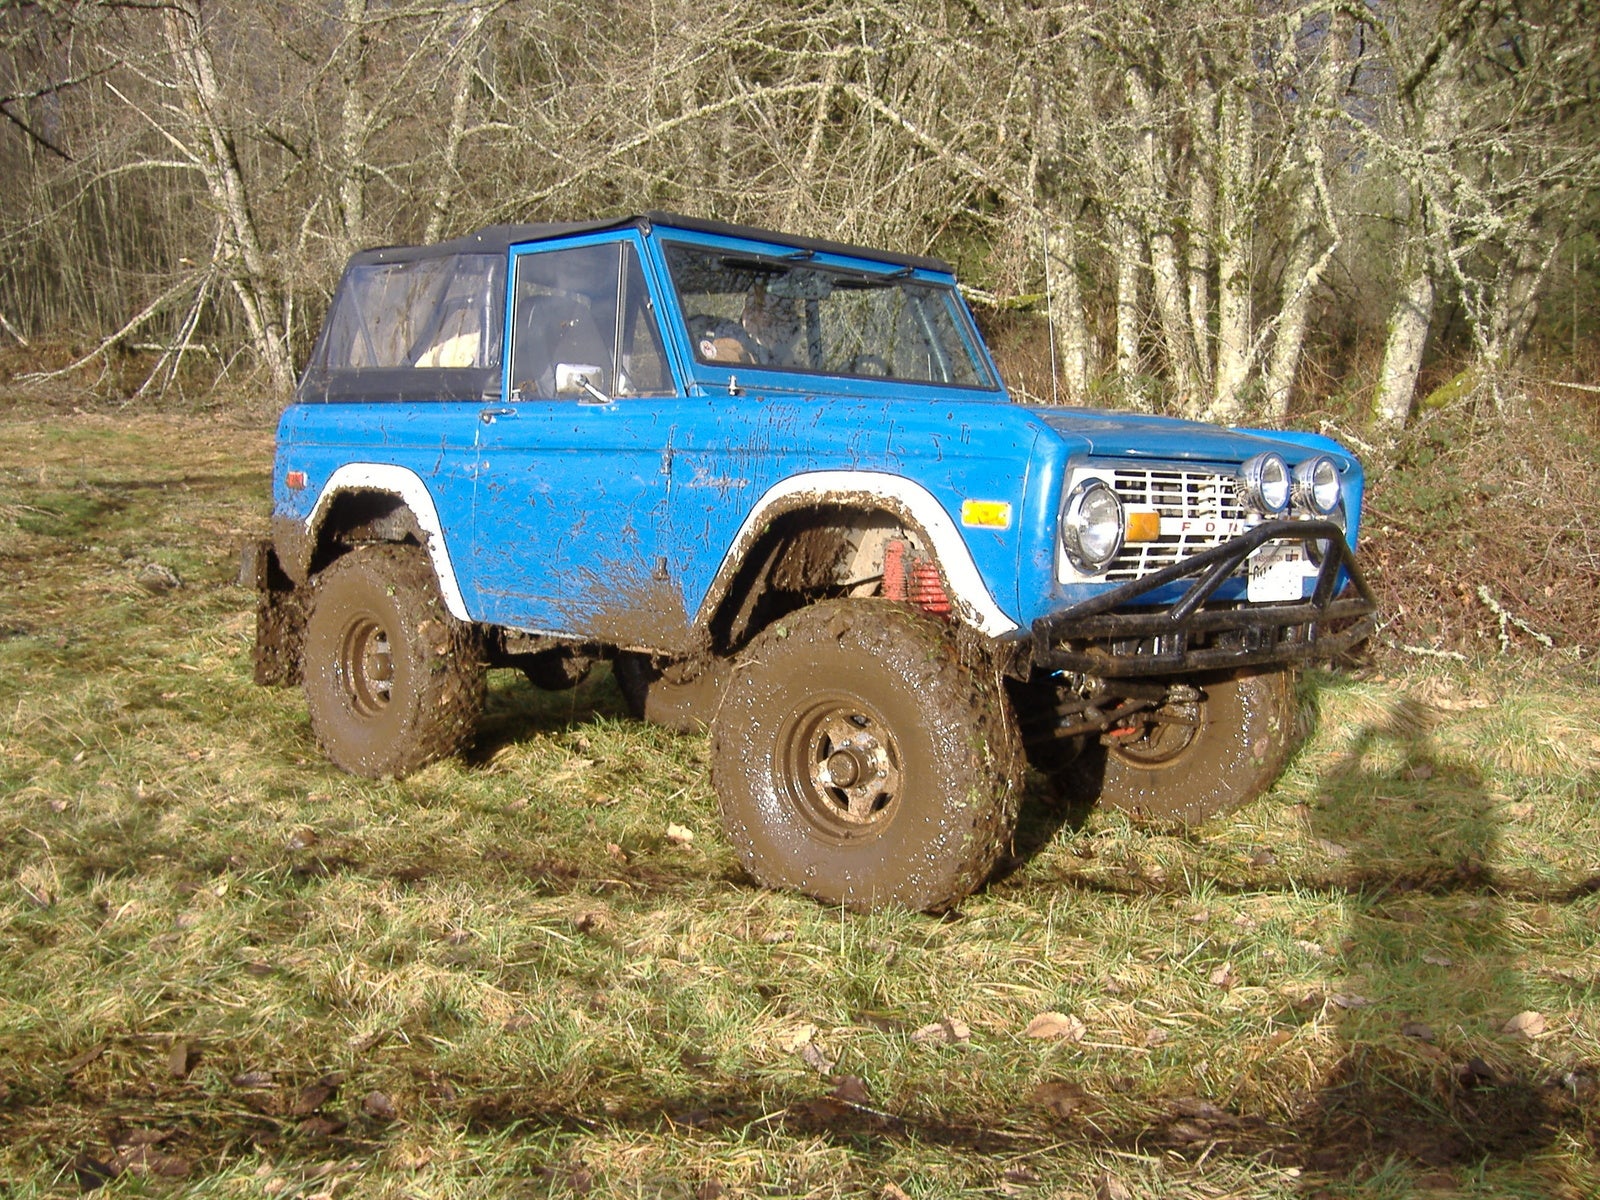 1976 Ford Bronco picture, exterior